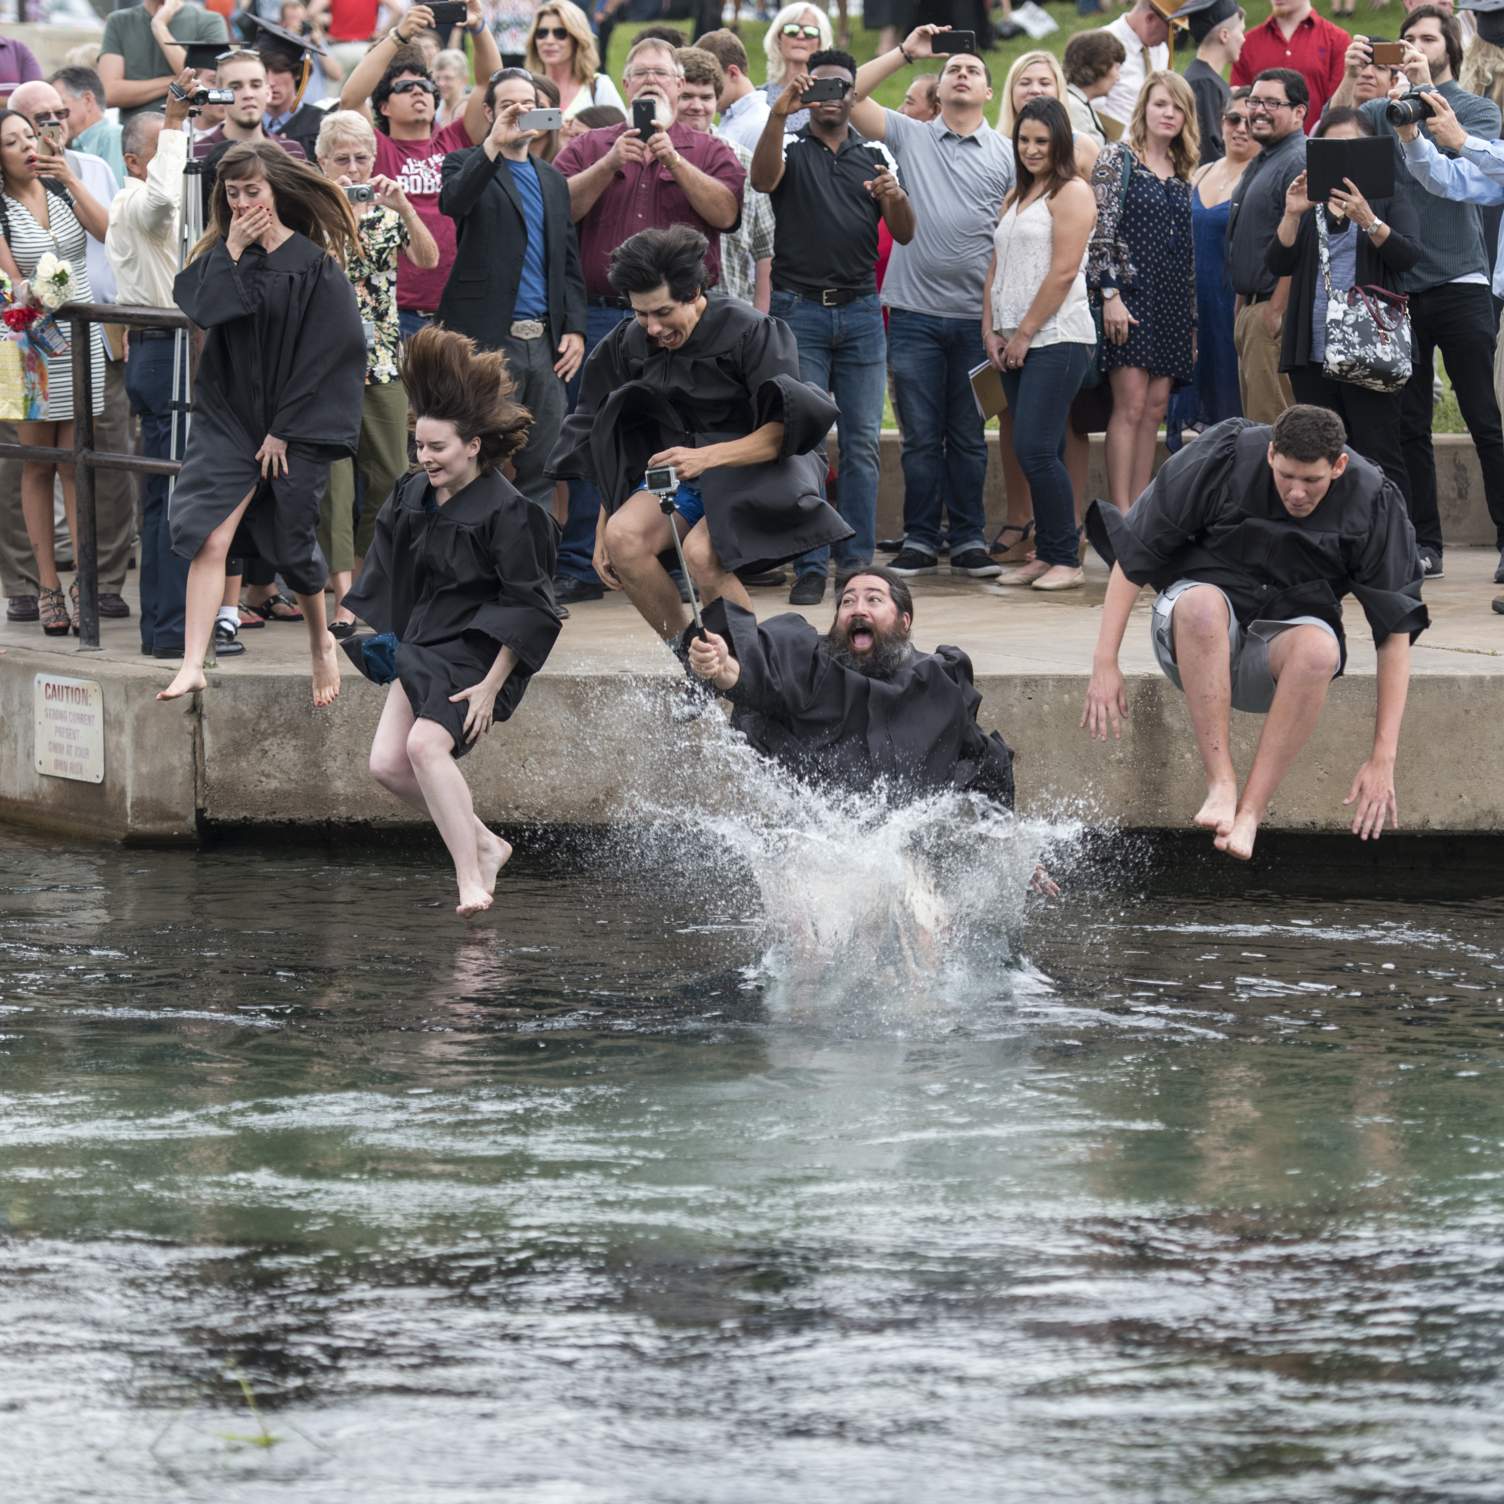 Graduates jumping into the river